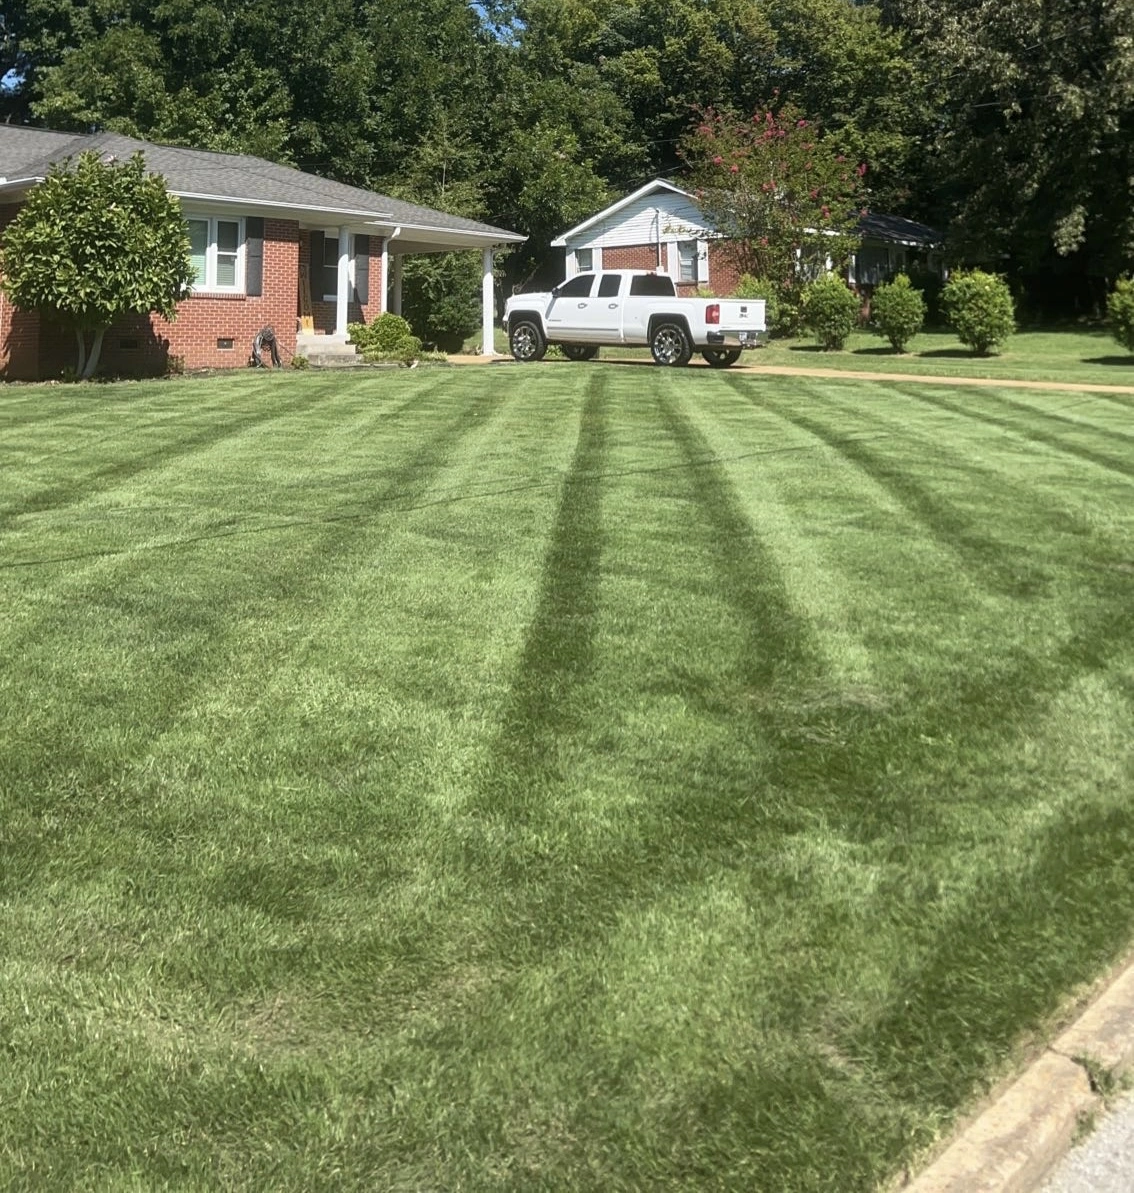 Recently mowed, trimmed, and edged lawn at a home in Ripley, TN.